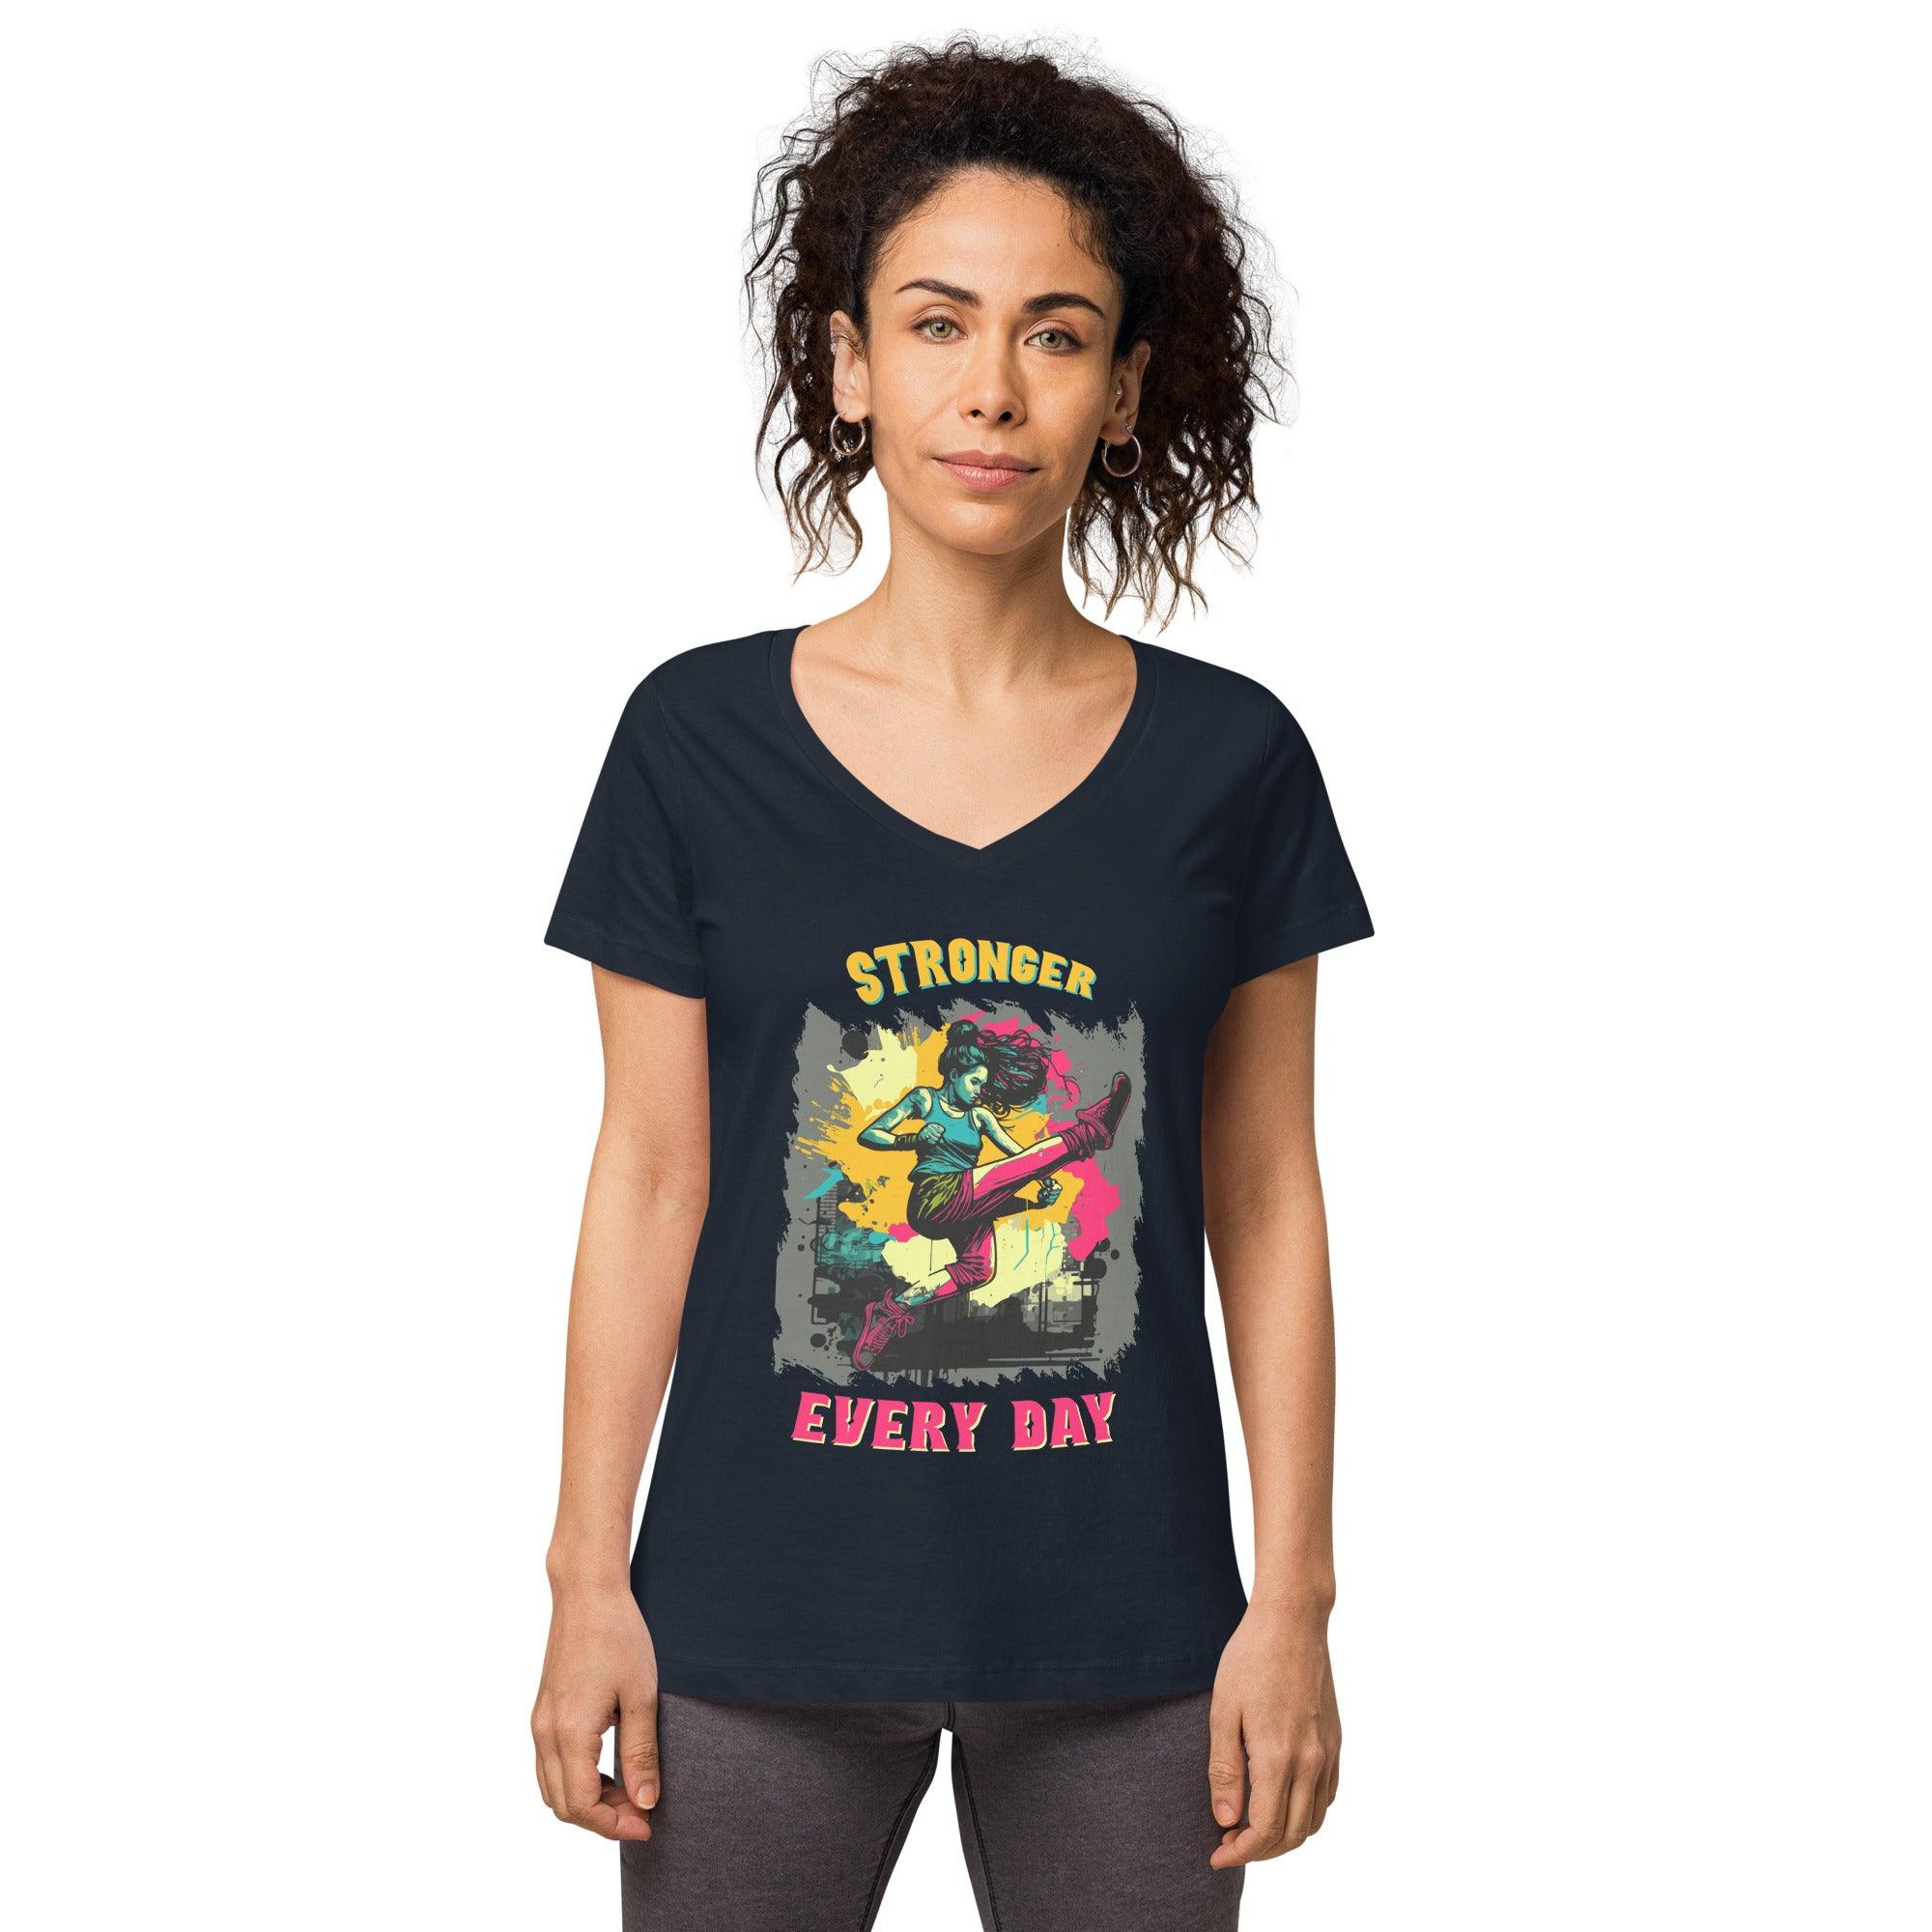 Stronger Everyday Women’s Fitted V-Neck T-Shirt - Beyond T-shirts